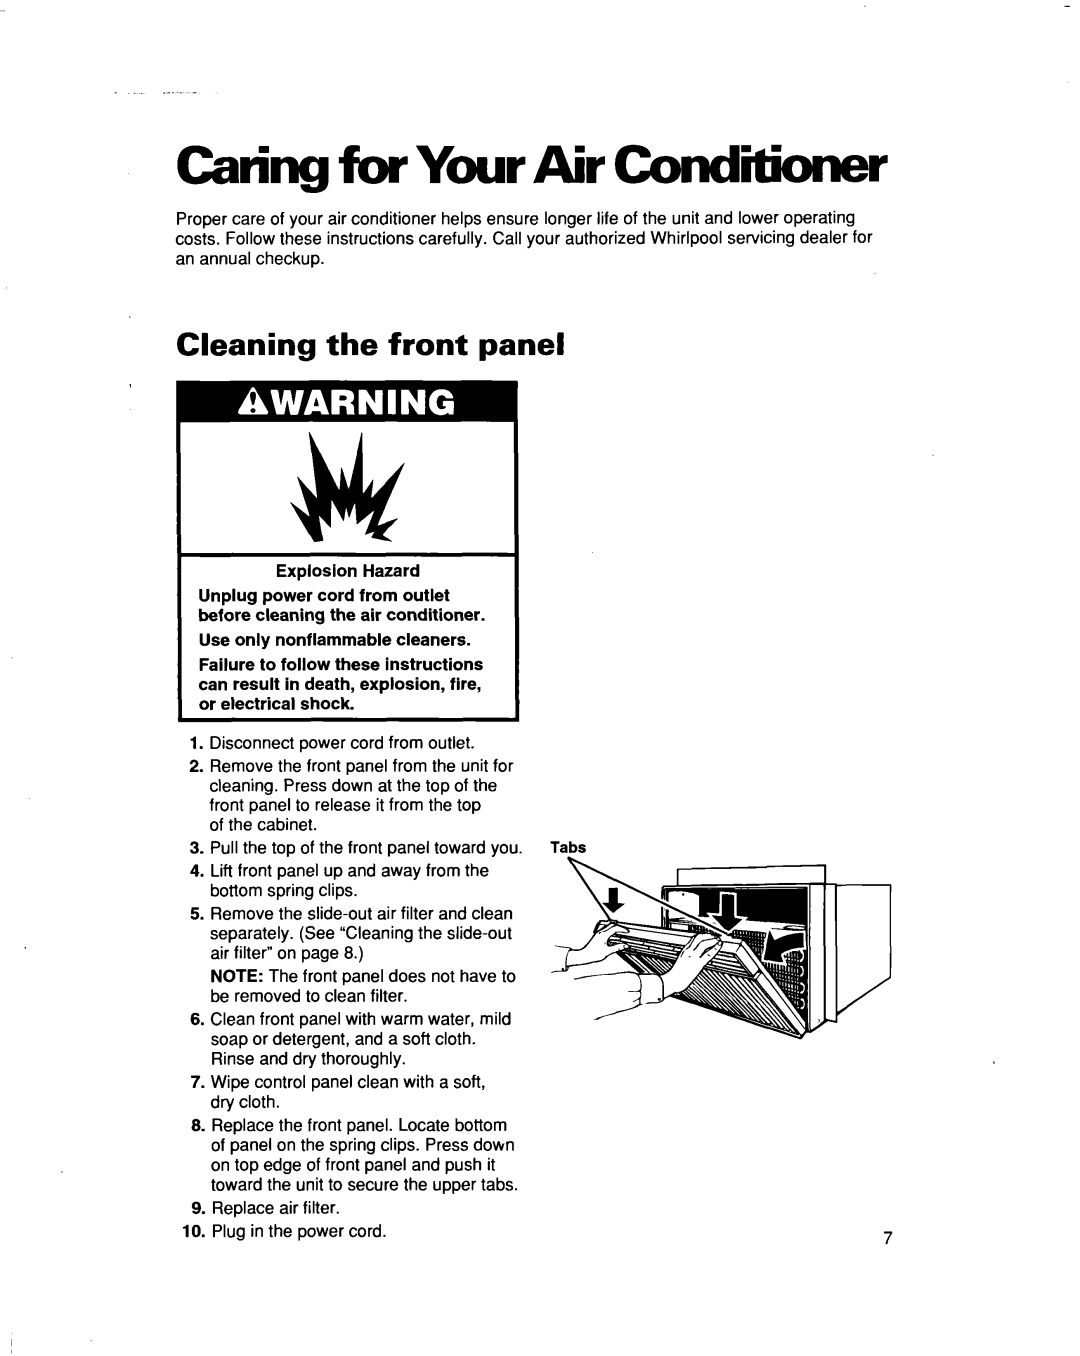 Whirlpool ACQ052 ACQ062 warranty CaringfbrYourAir Conditioner, Cleaning the front panel 